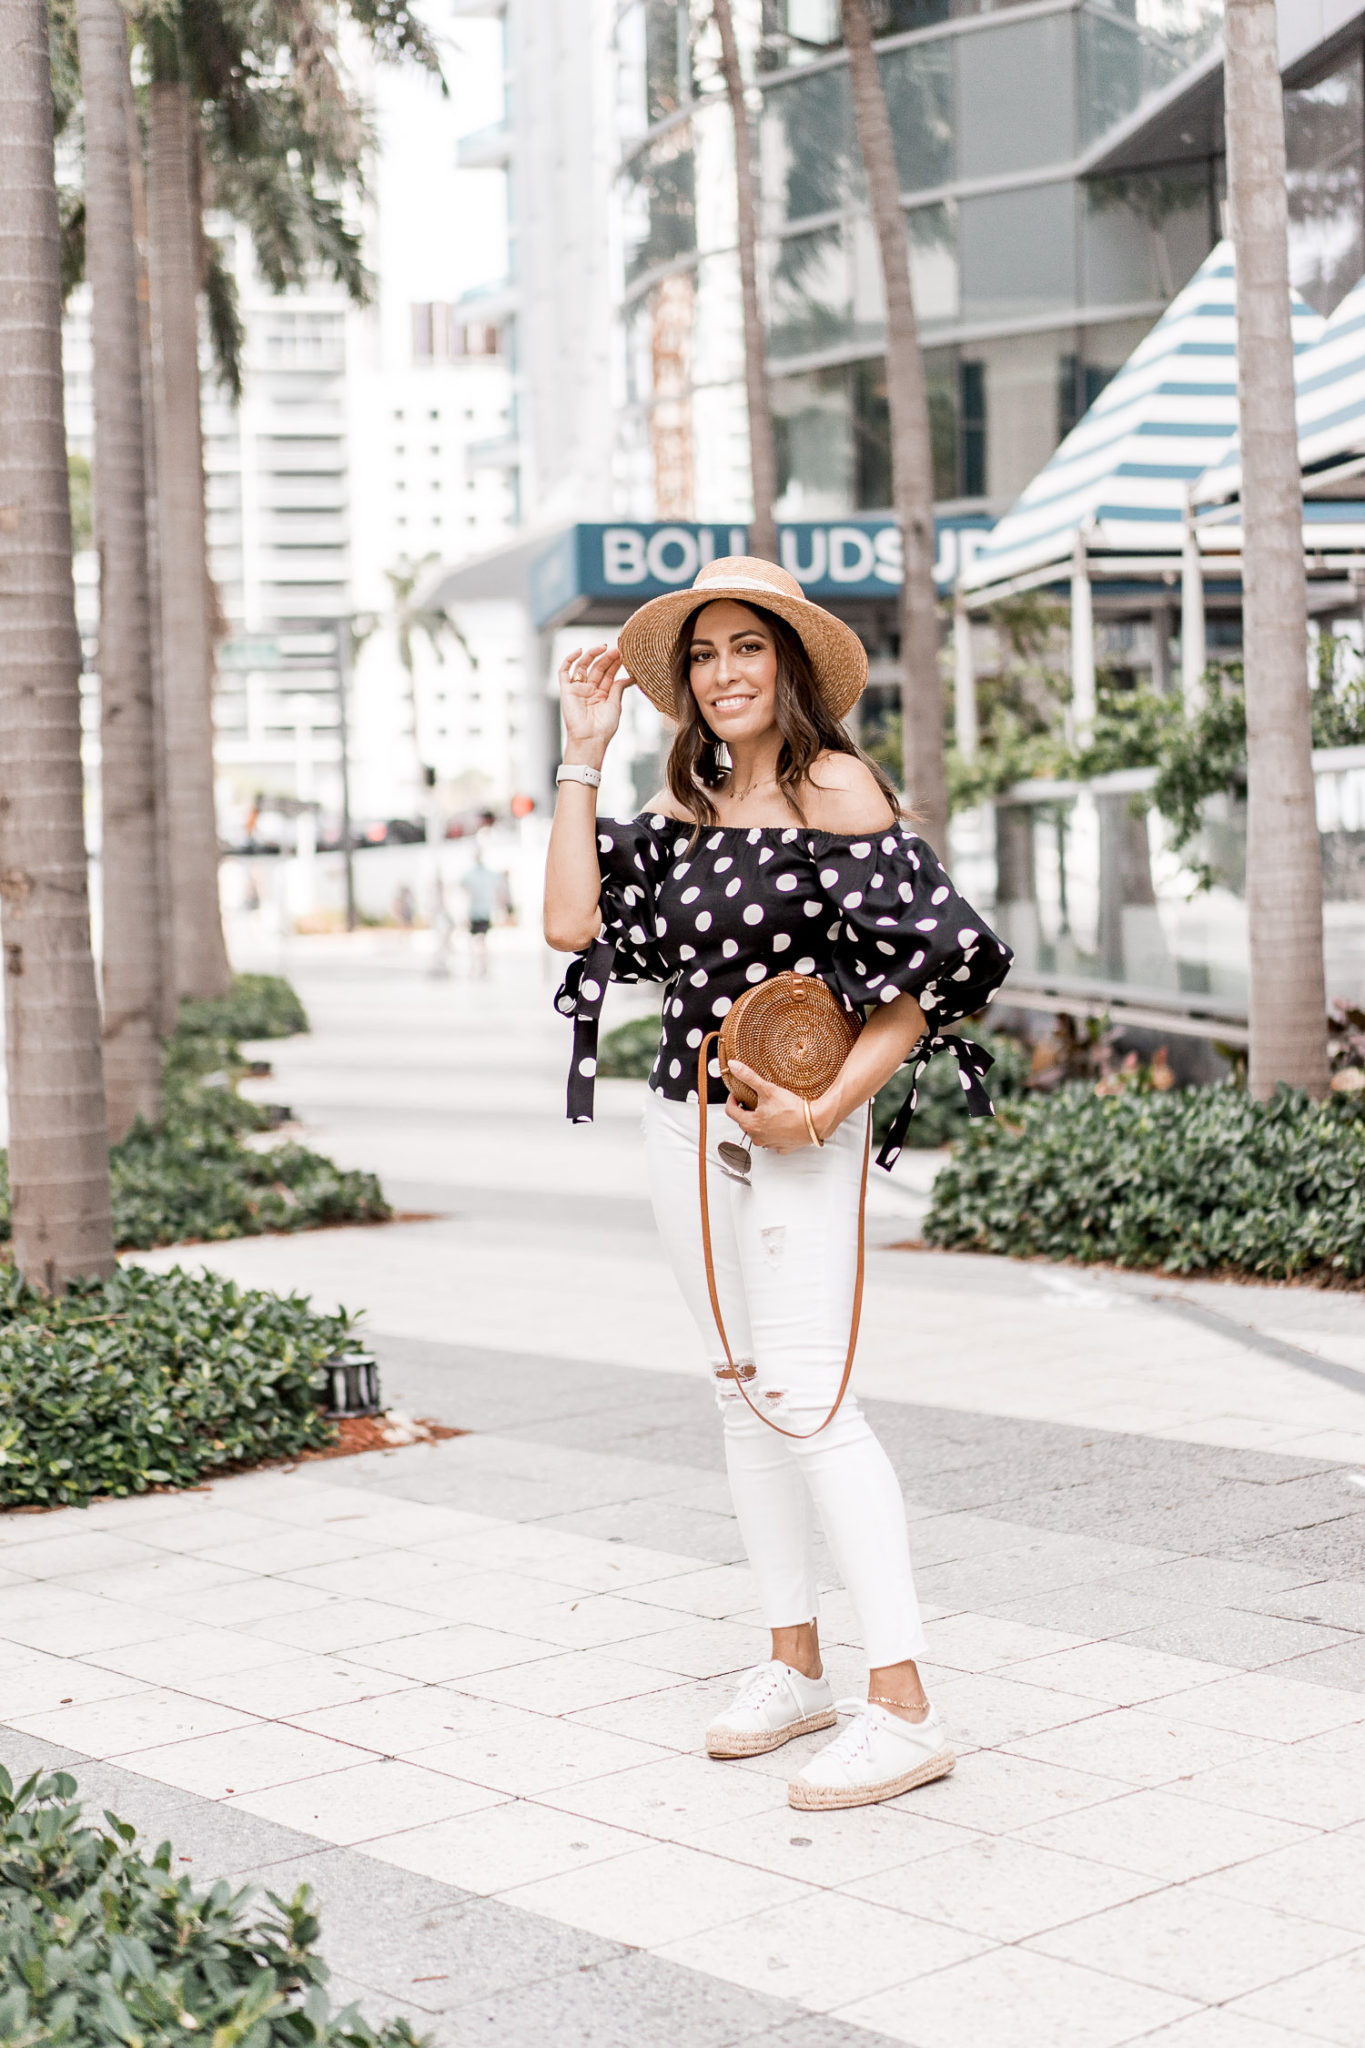 Miami Staycation with Boulud Sud and Marriott Hotels